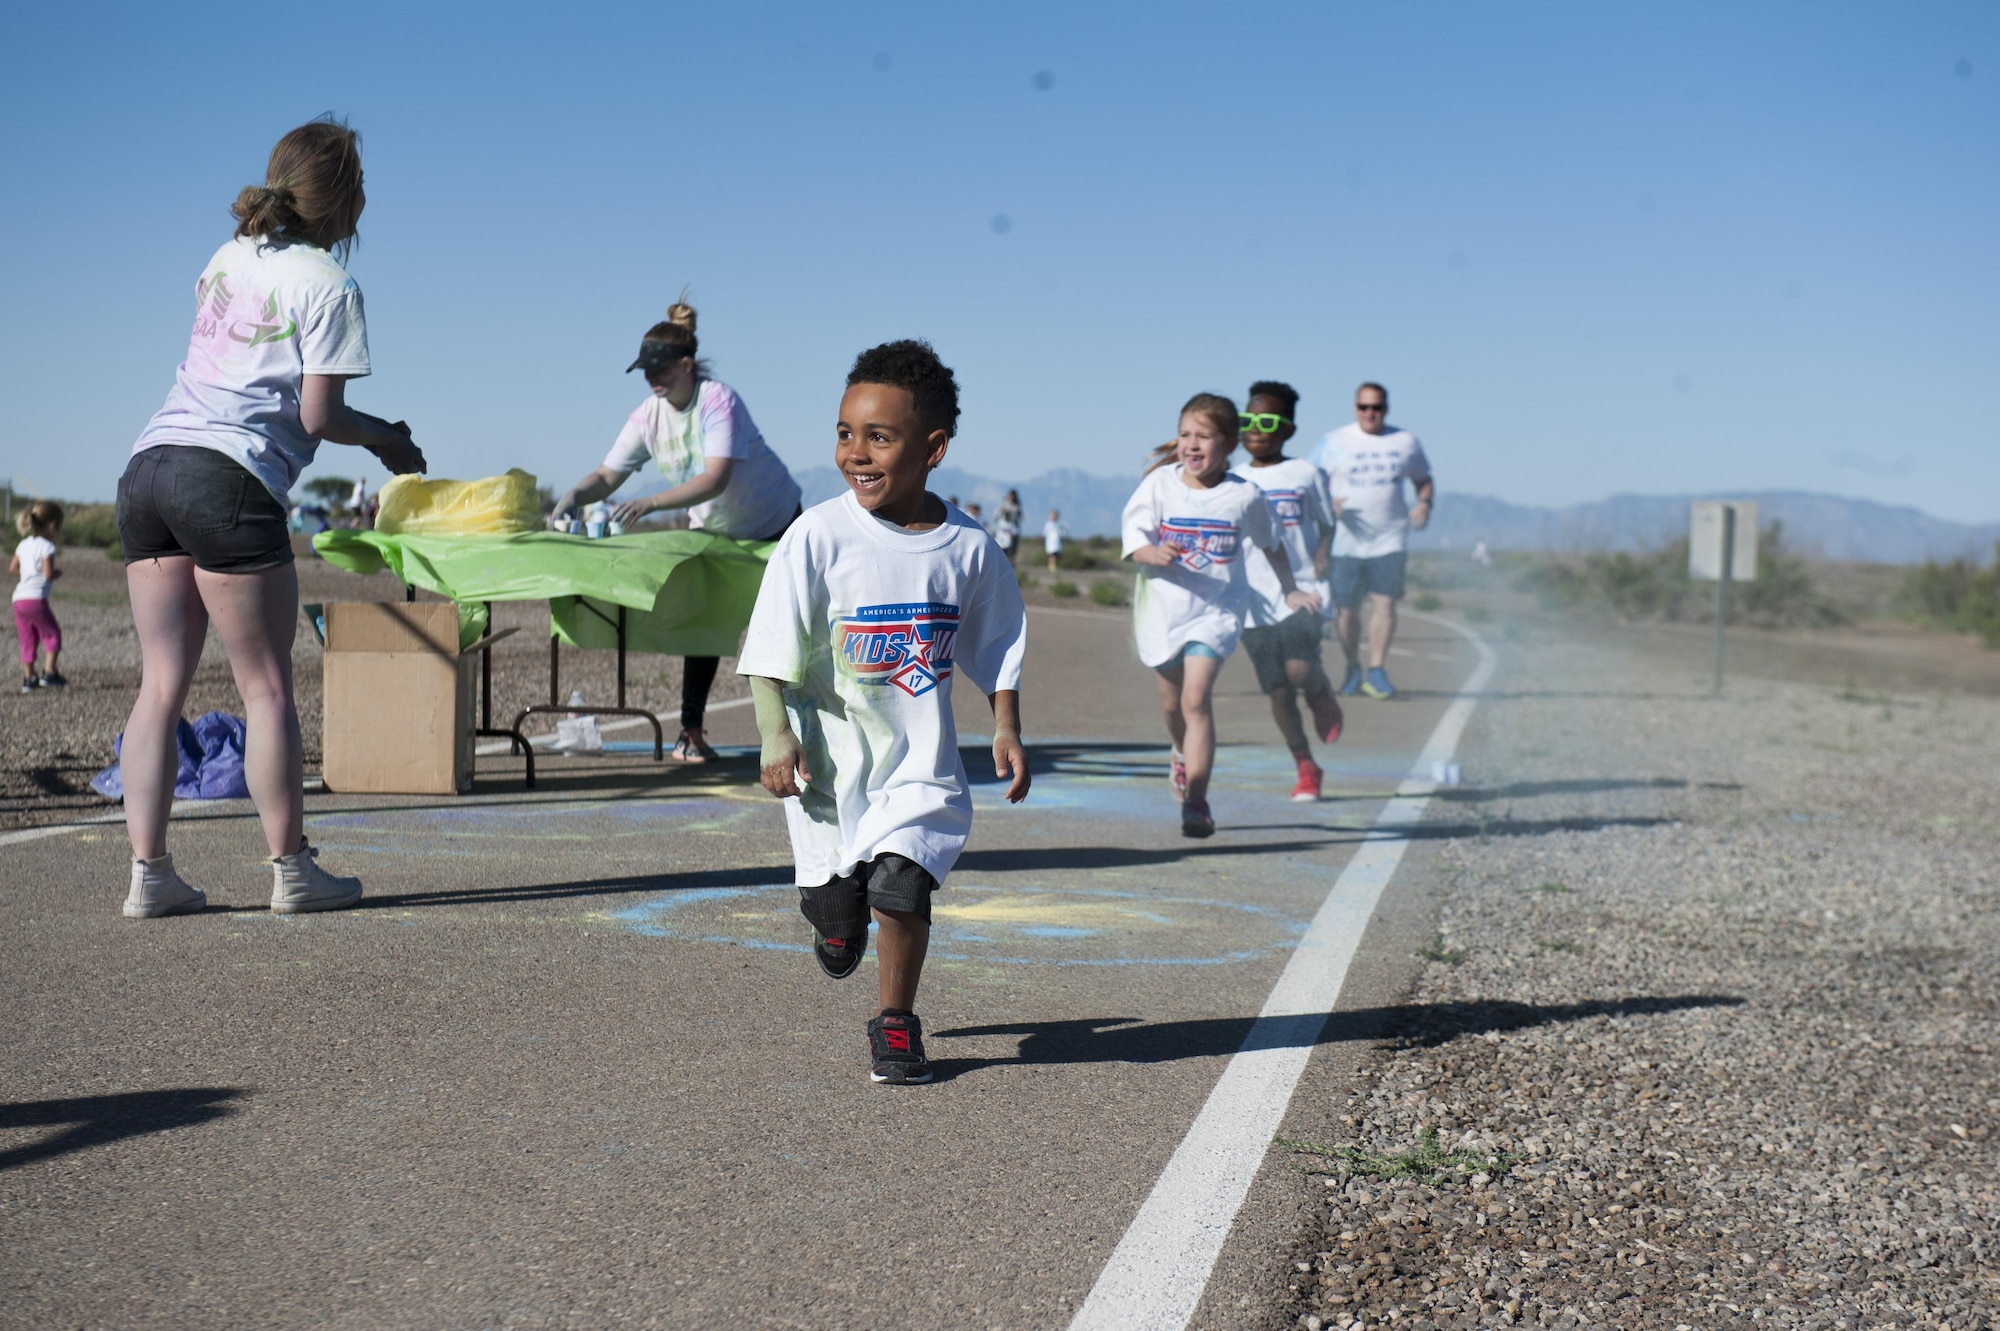 The Youth and Teen Center hosted the Art Blast color run 5K and the America’s Armed Forces Kids fun run at Holloman Air Force Base, N.M on May 20, 2017. During the run, volunteers set up tables along the track with various colored paint powder to toss at the runners transforming their fresh white shirts into a colorful canvas. (U.S. Air Force photo by Airman 1st Class Ilyana A. Escalona)